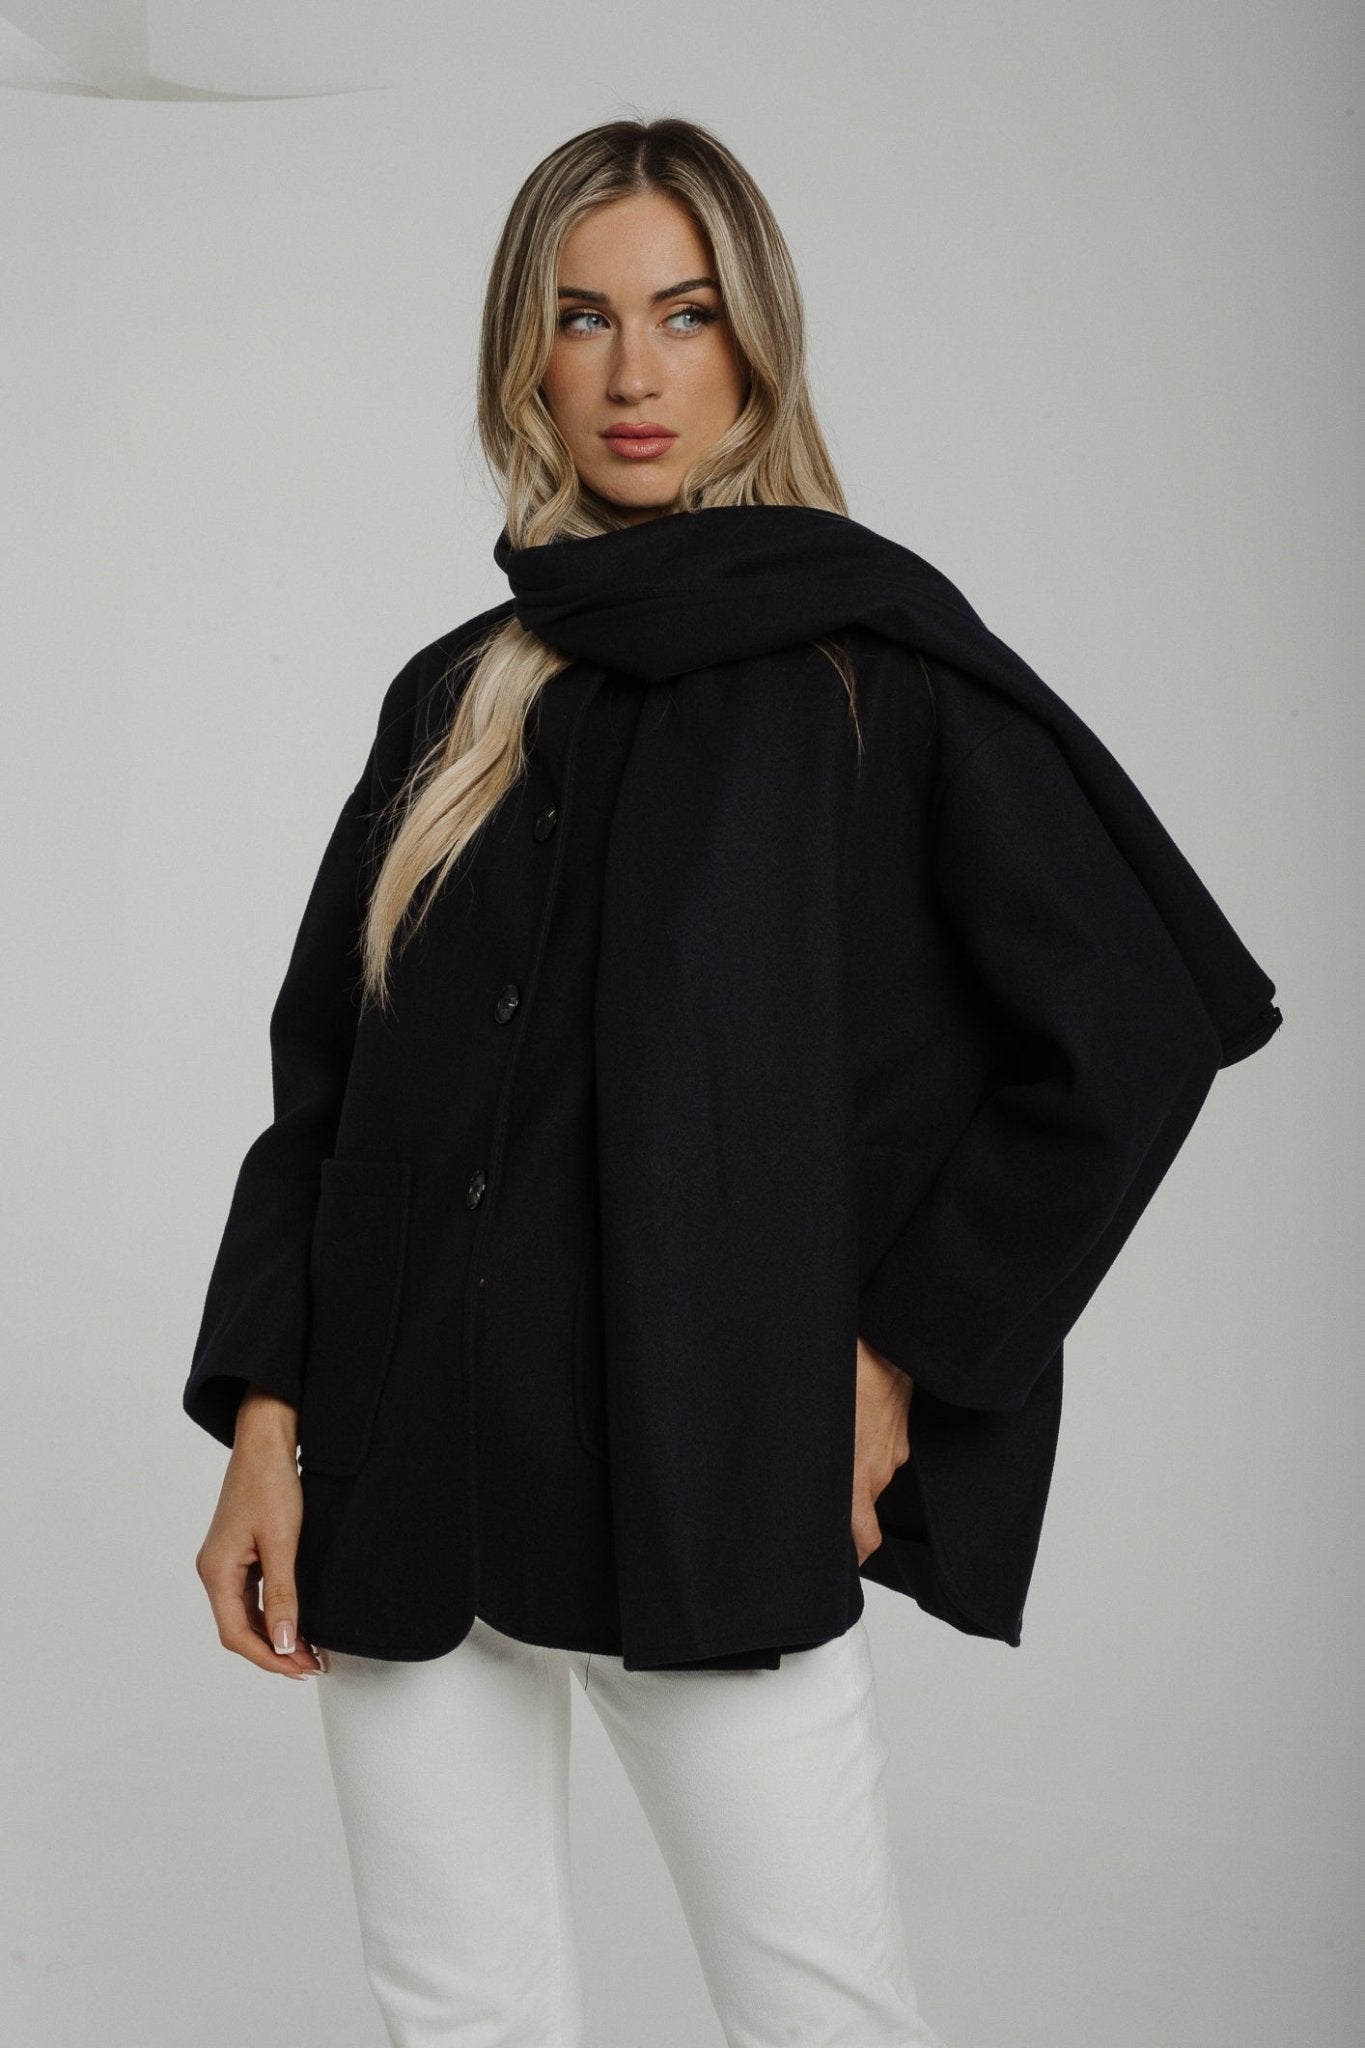 Aria Jacket With Scarf In Navy - The Walk in Wardrobe